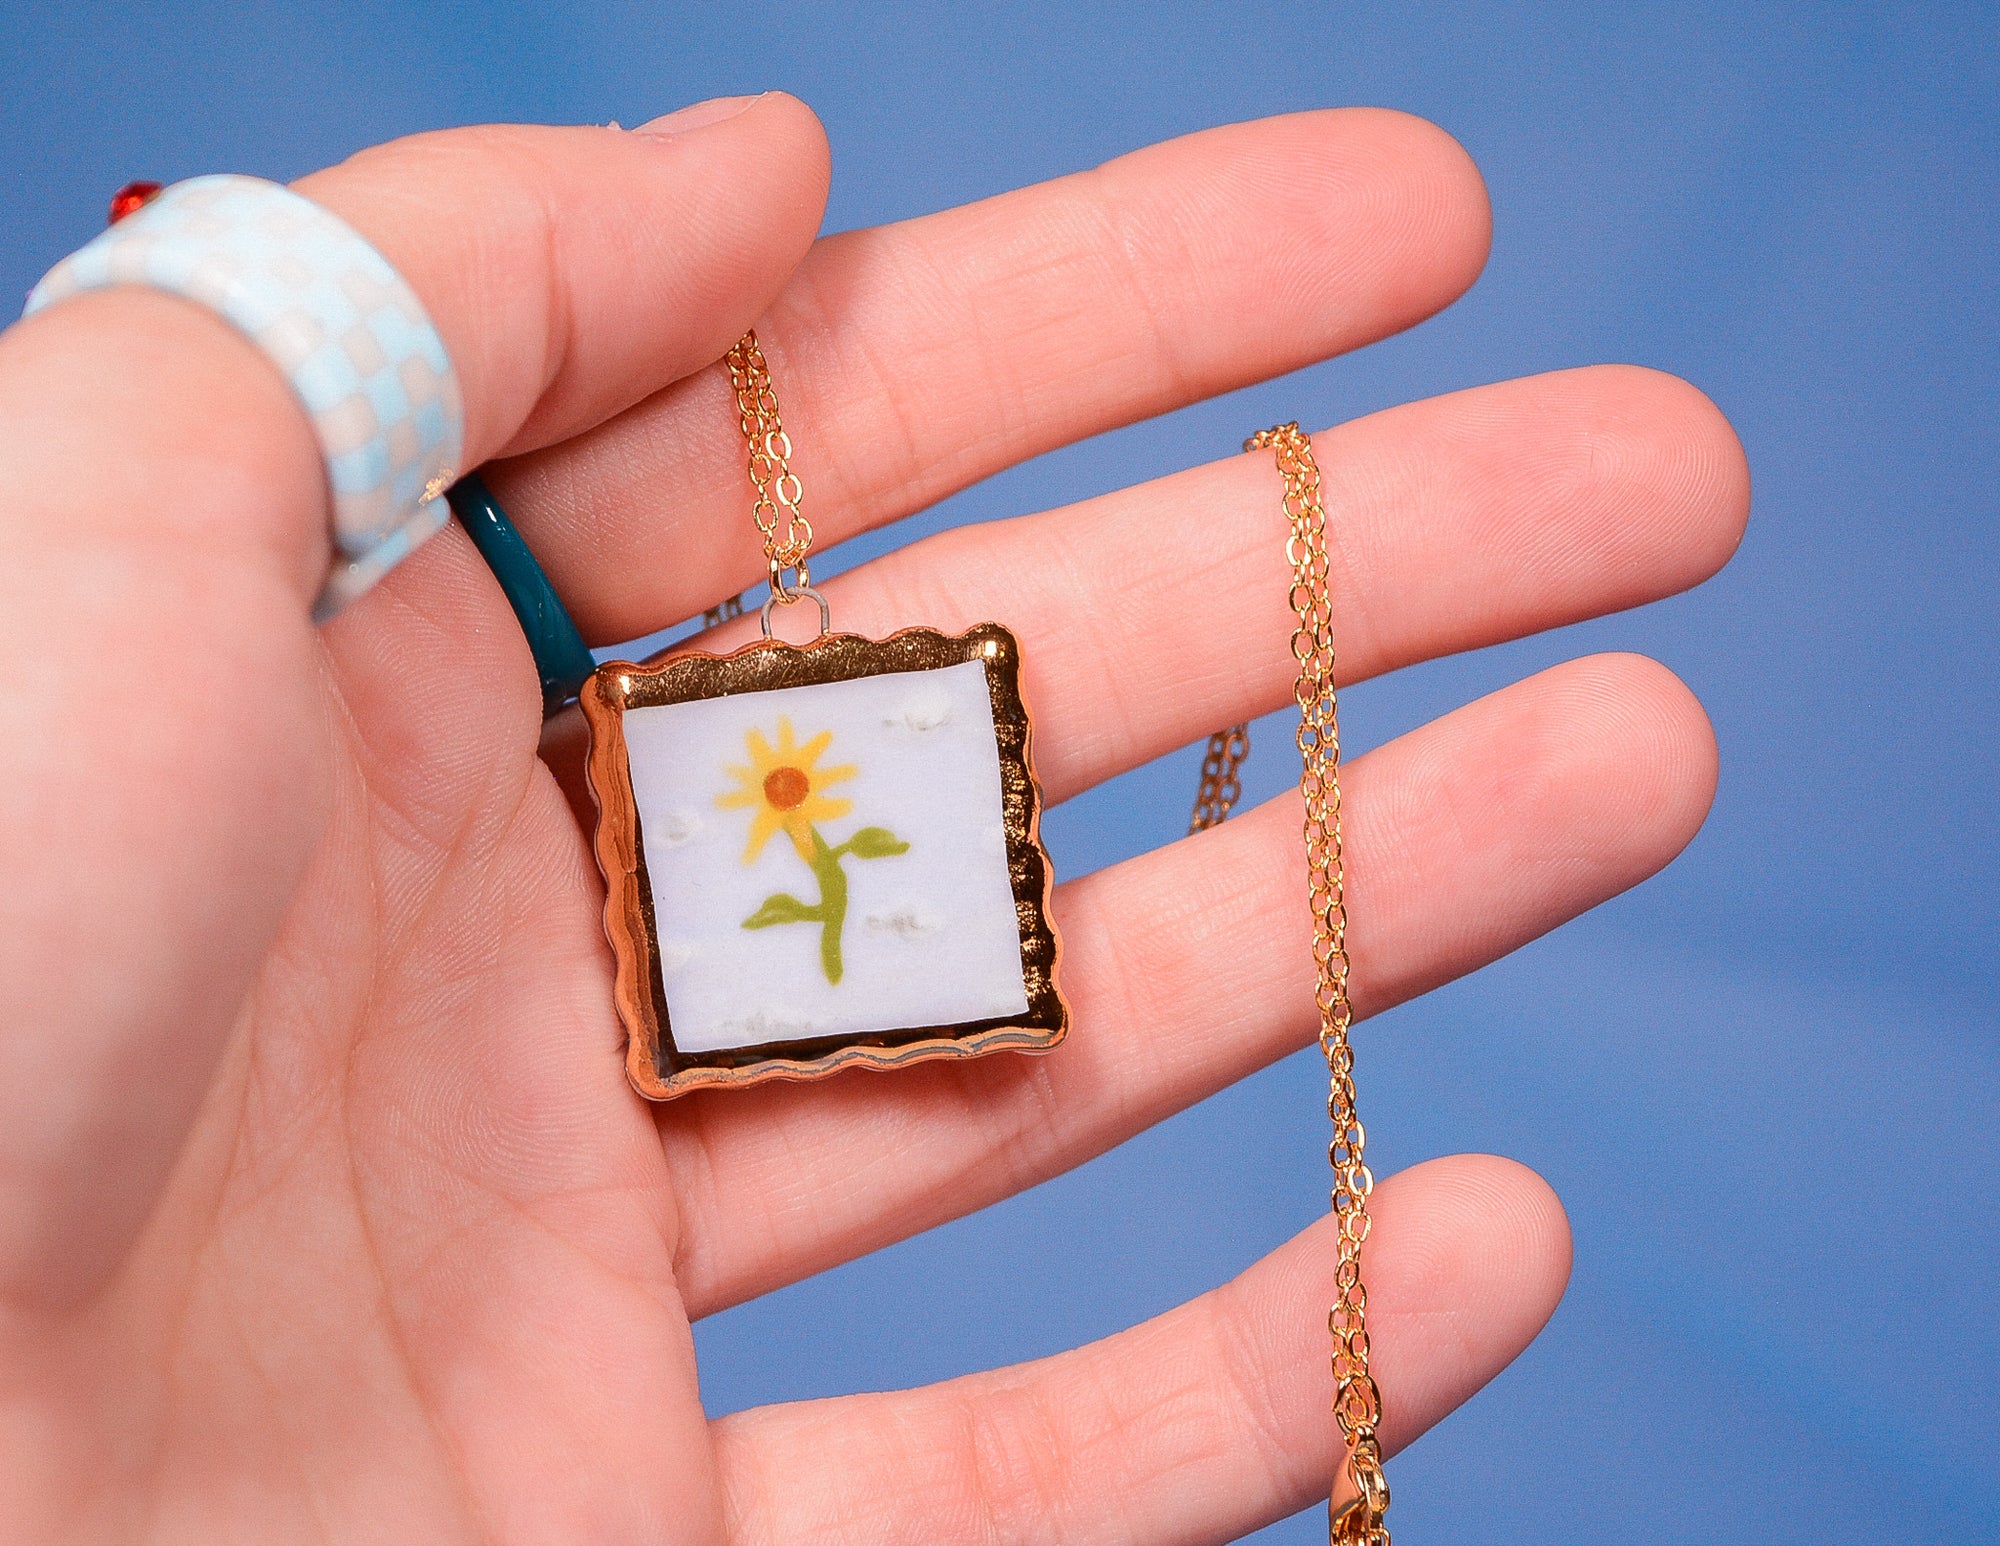 Sky Sunflower Painting Necklace